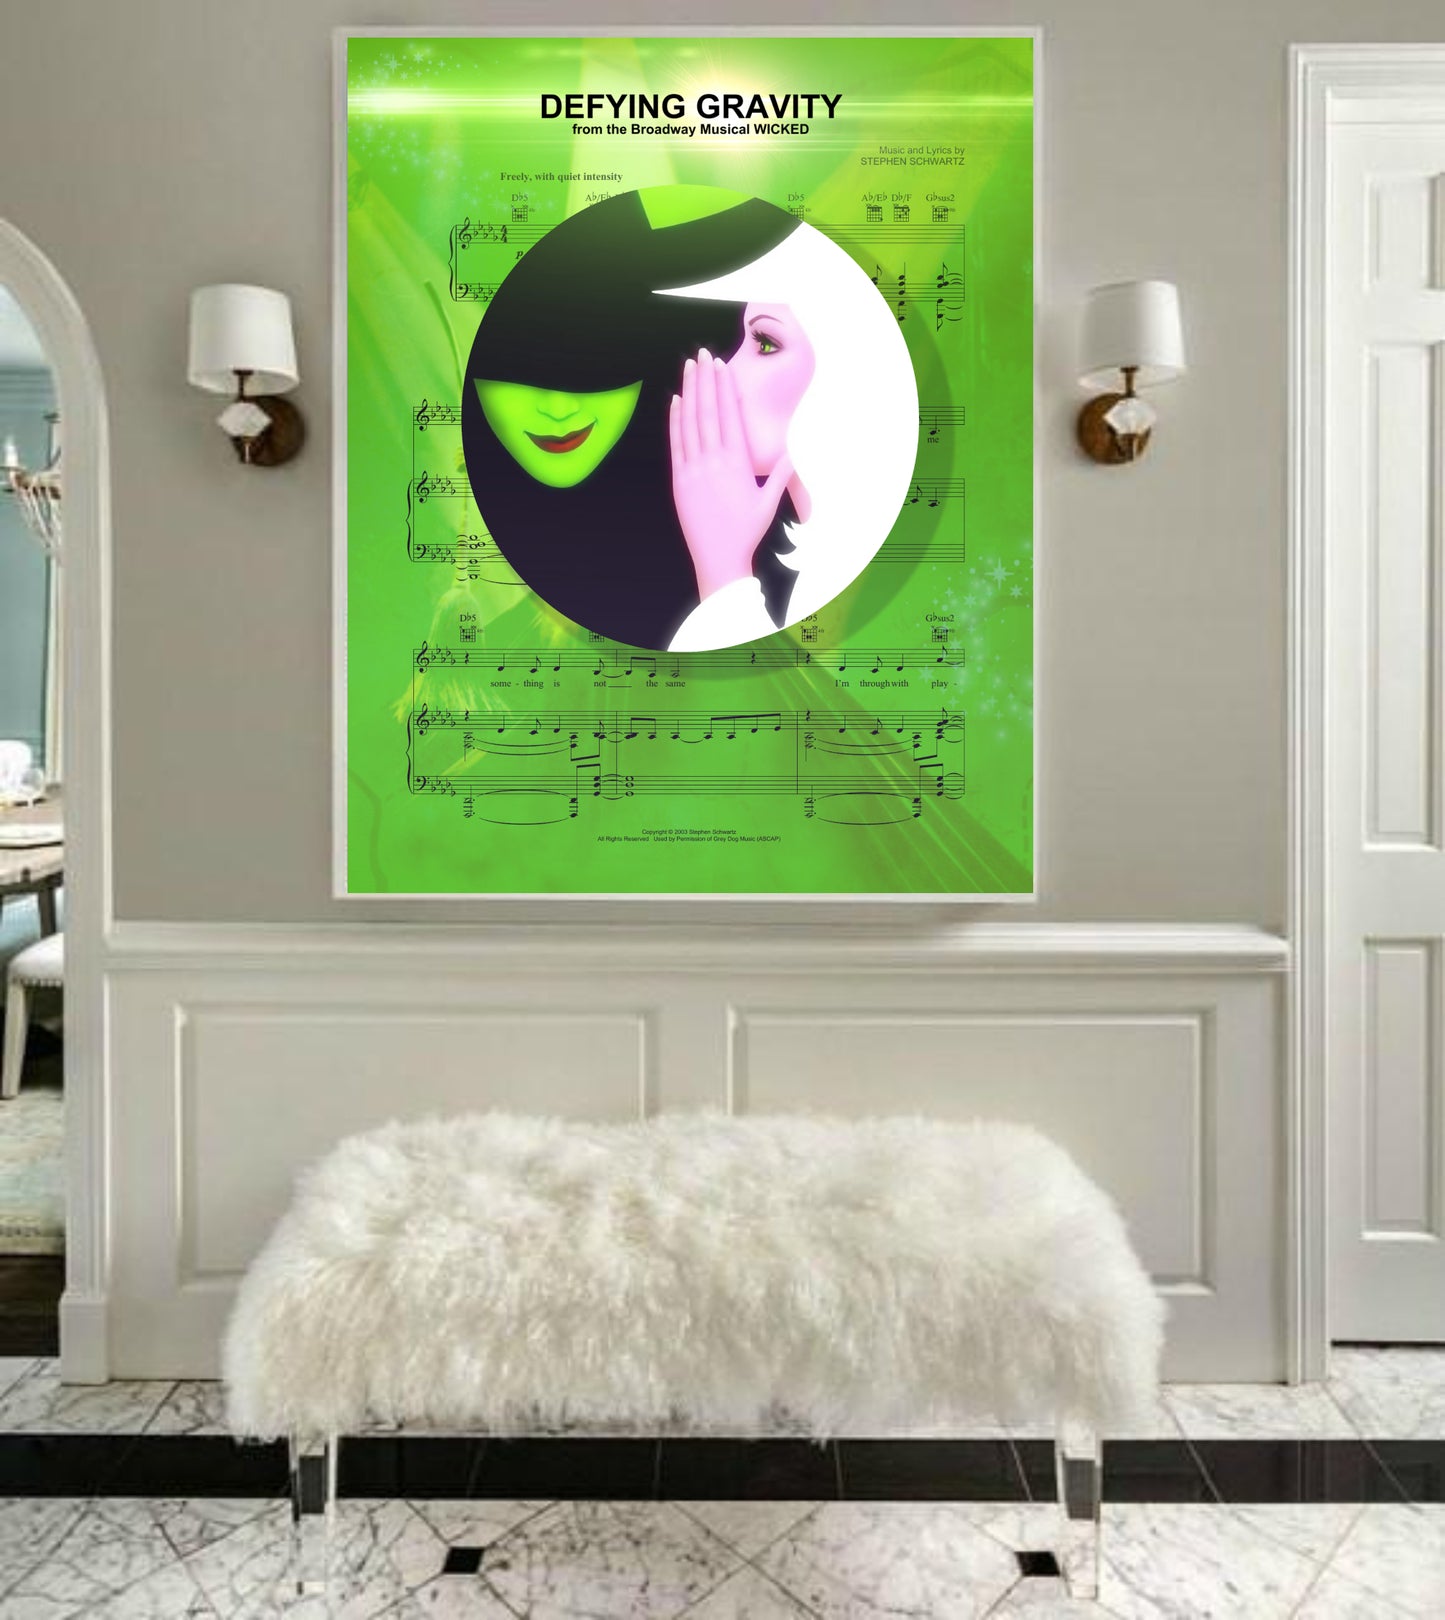 Wicked Defying poster print